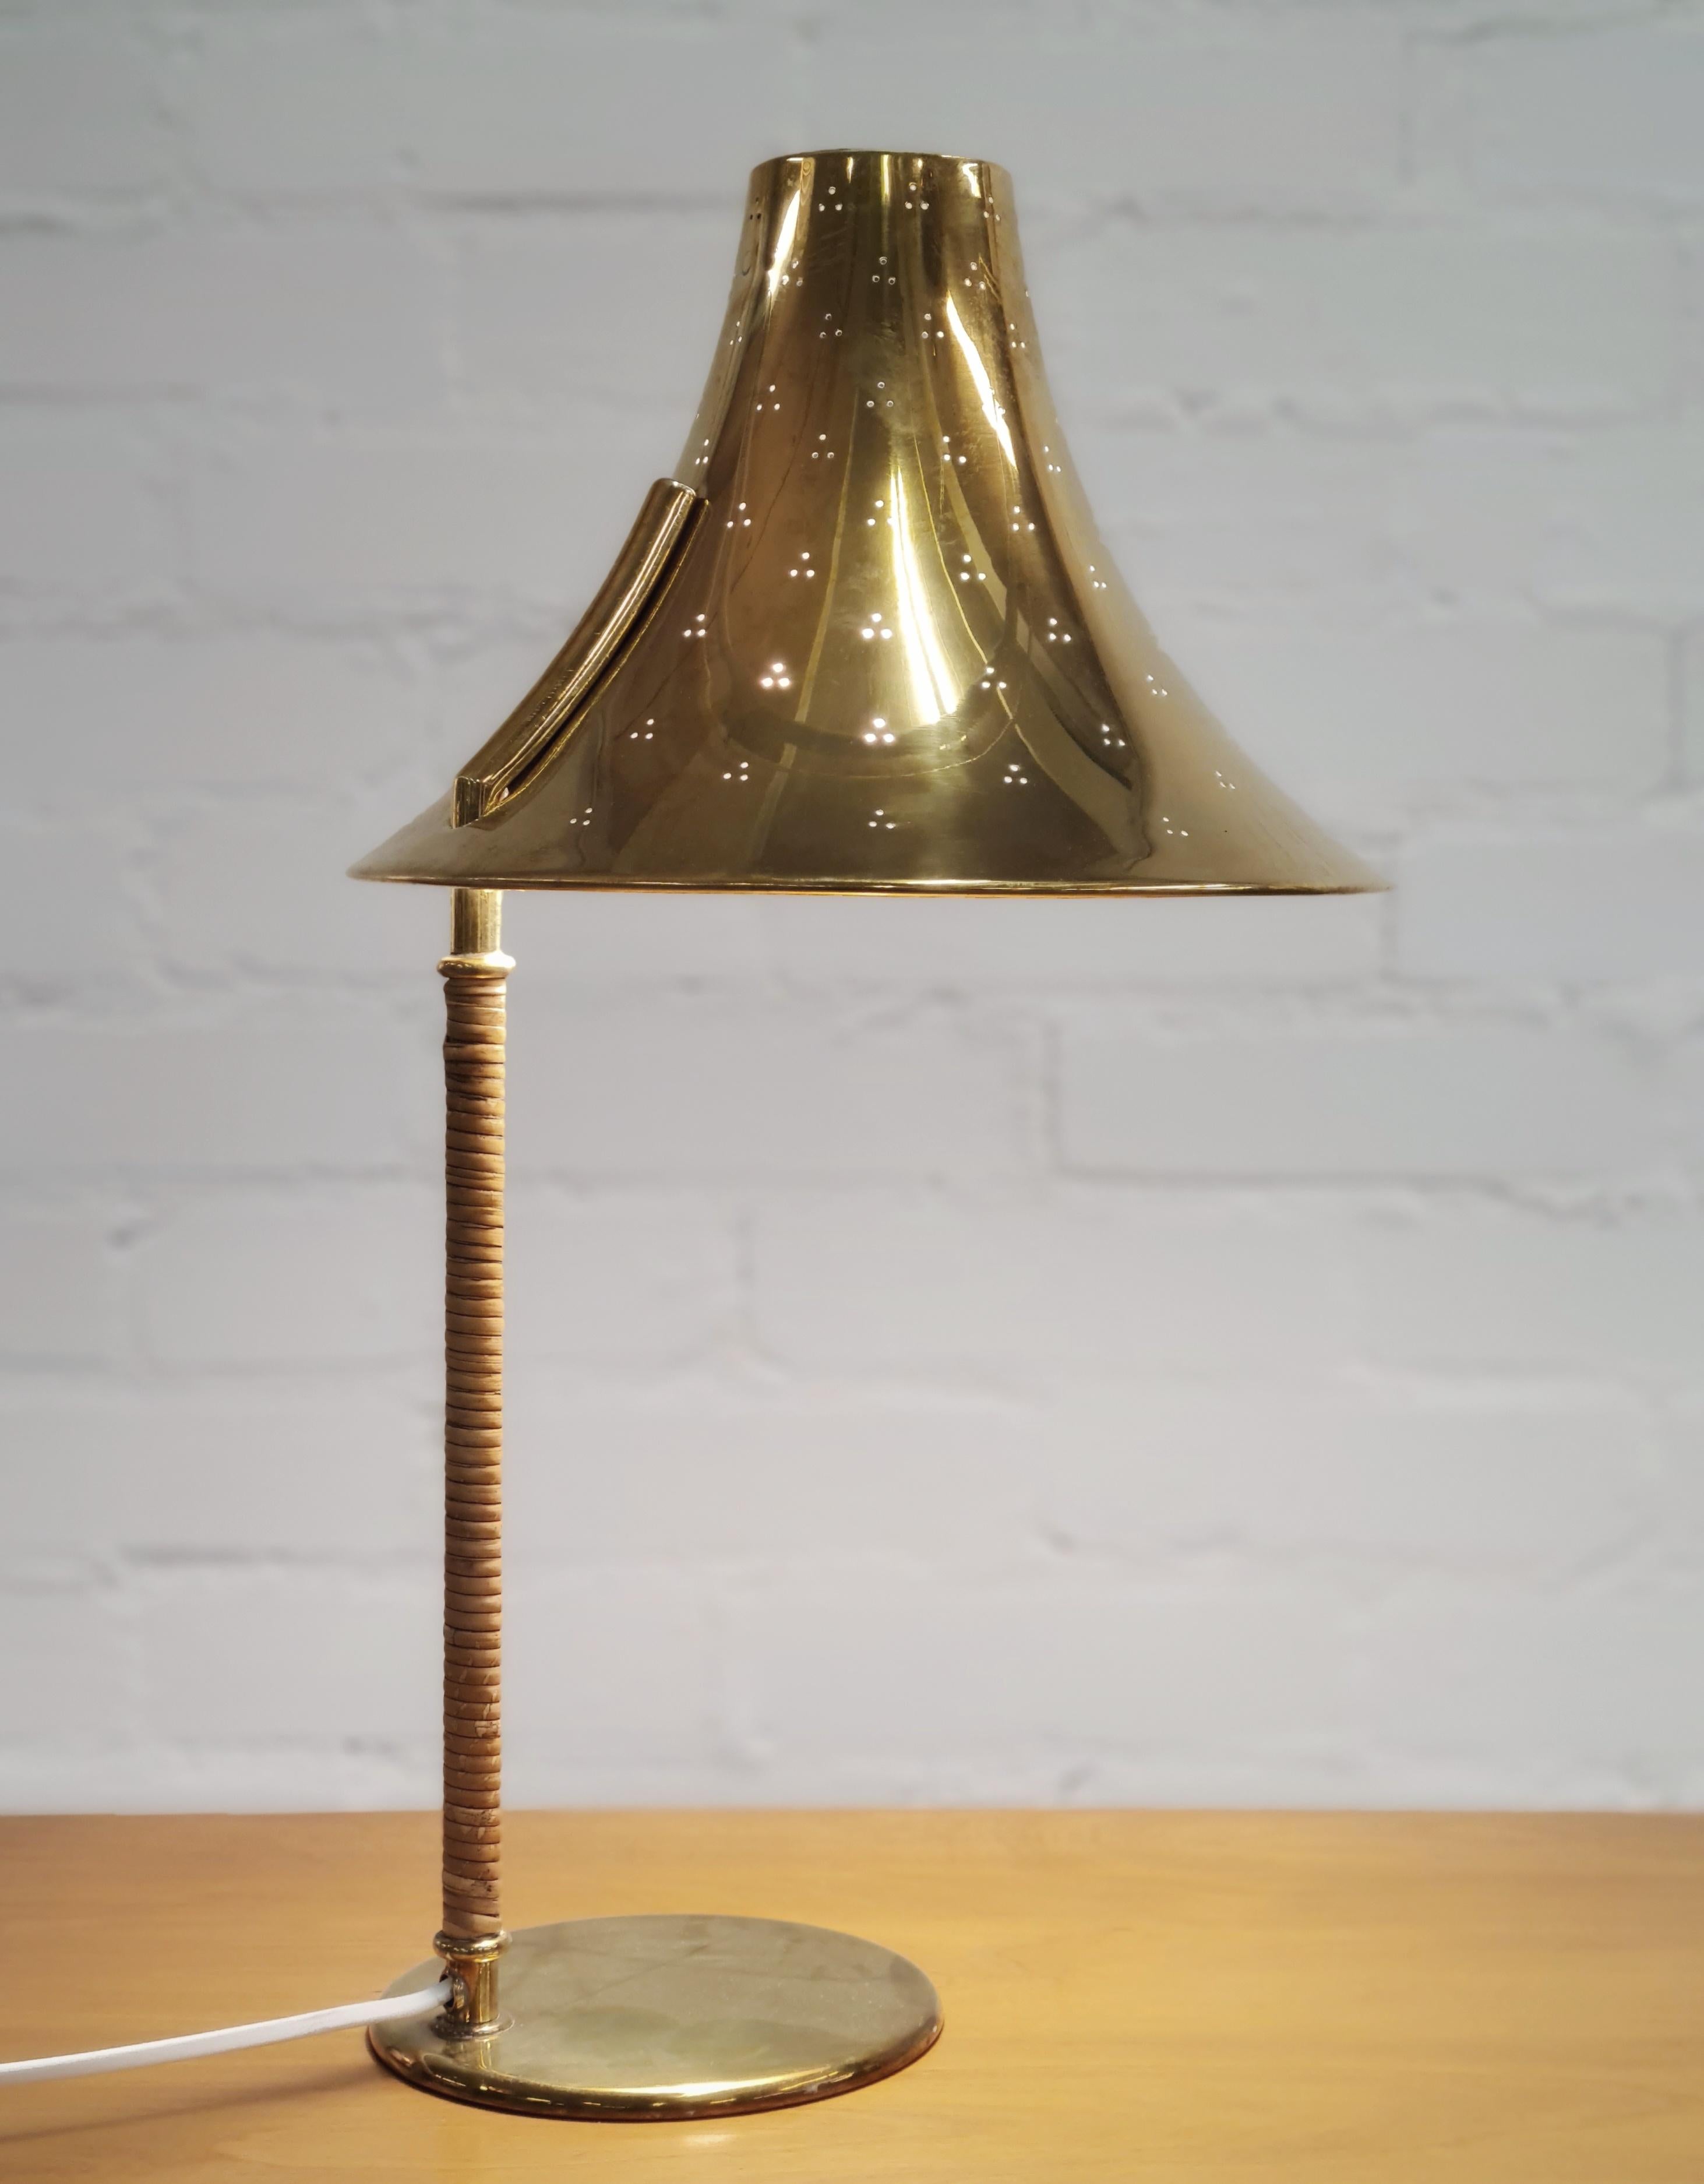 Paavo Tynell Table Lamp 9208, Taito In Good Condition For Sale In Helsinki, FI